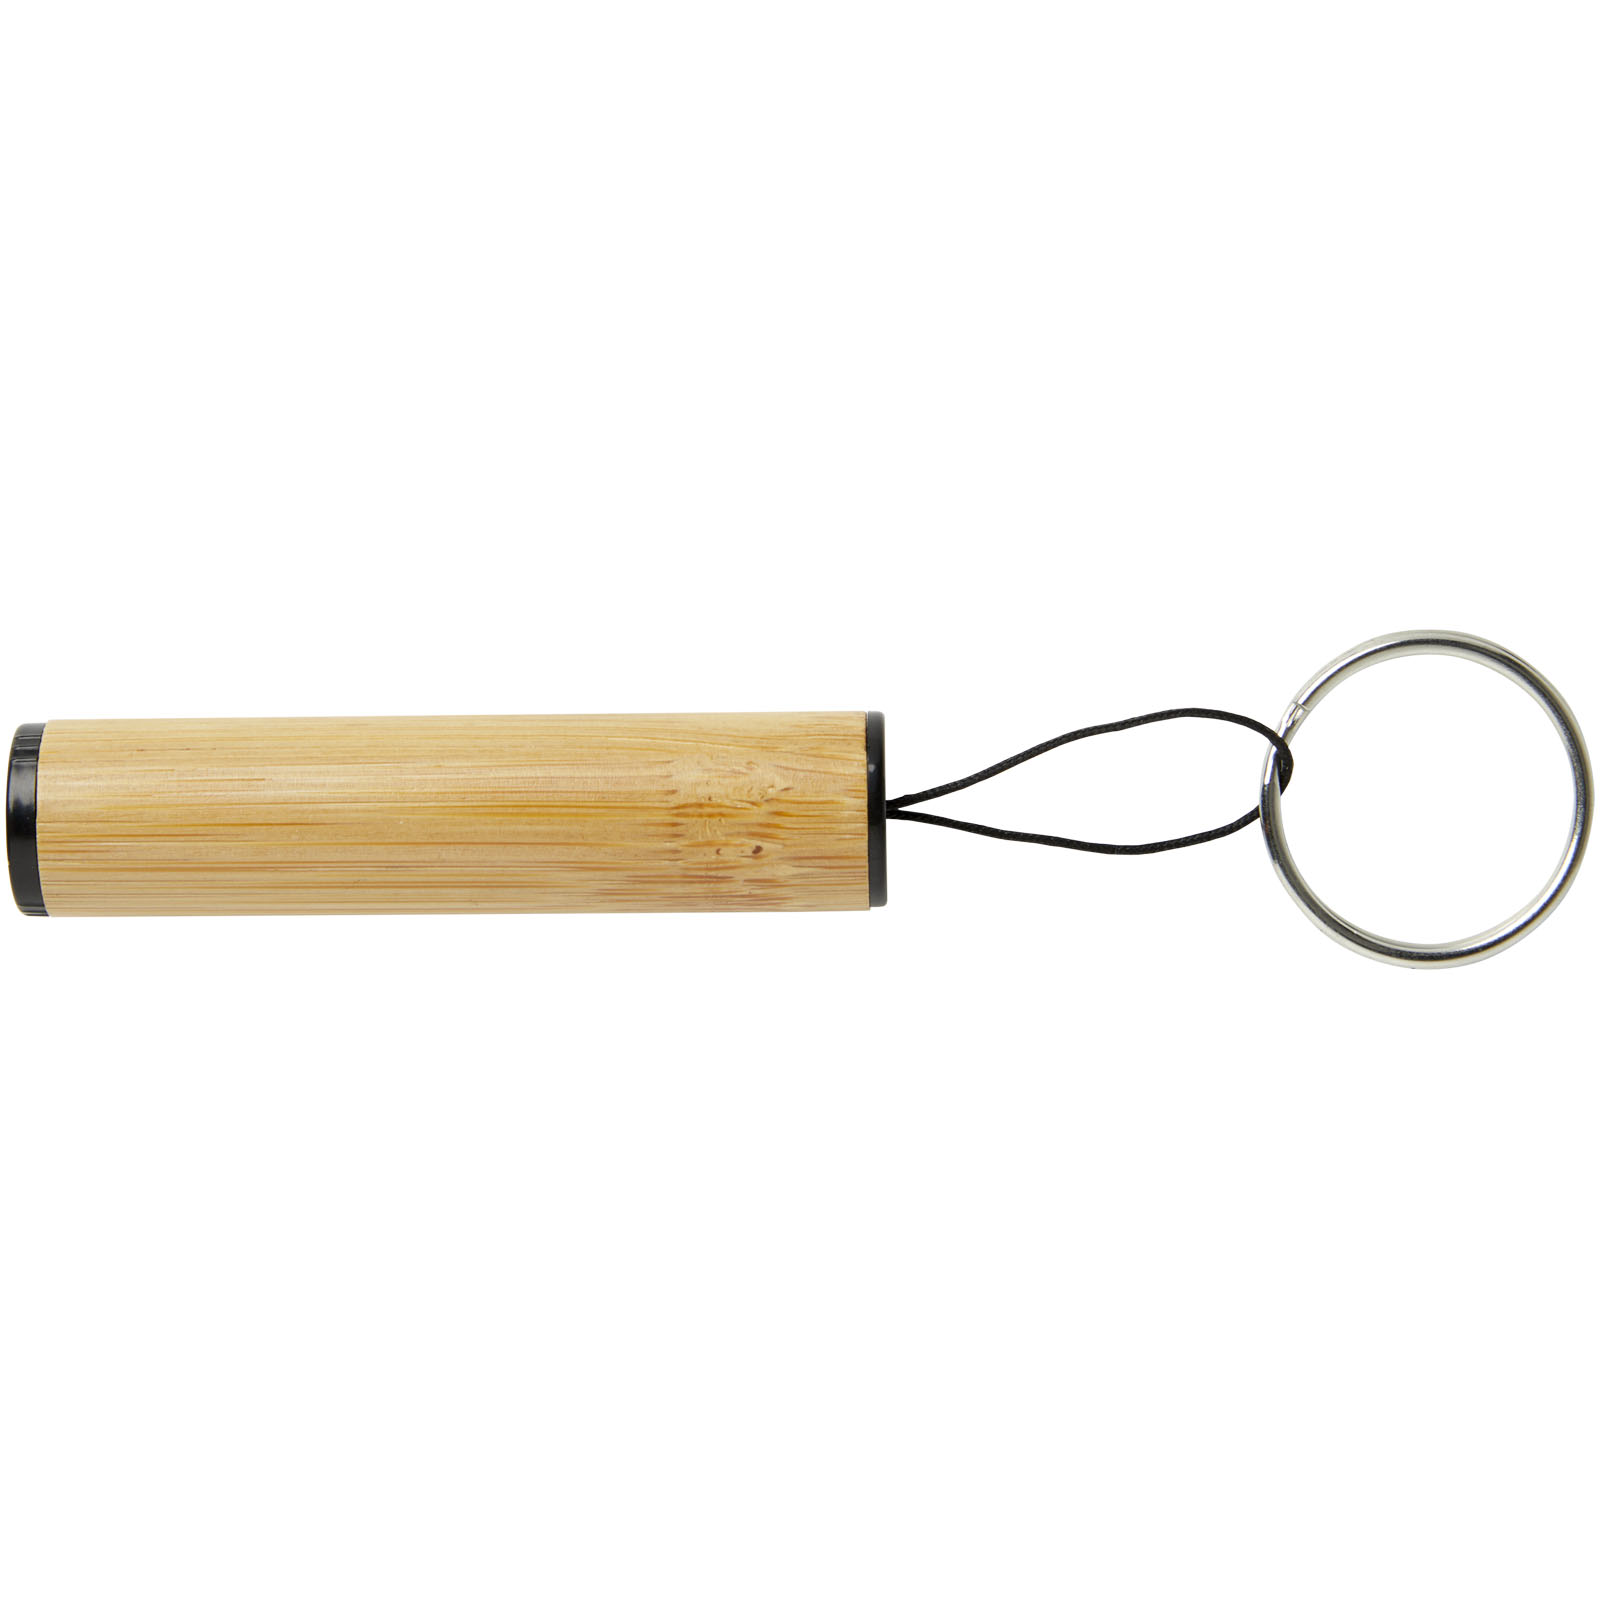 Advertising Lamps - Cane bamboo key ring with light - 1